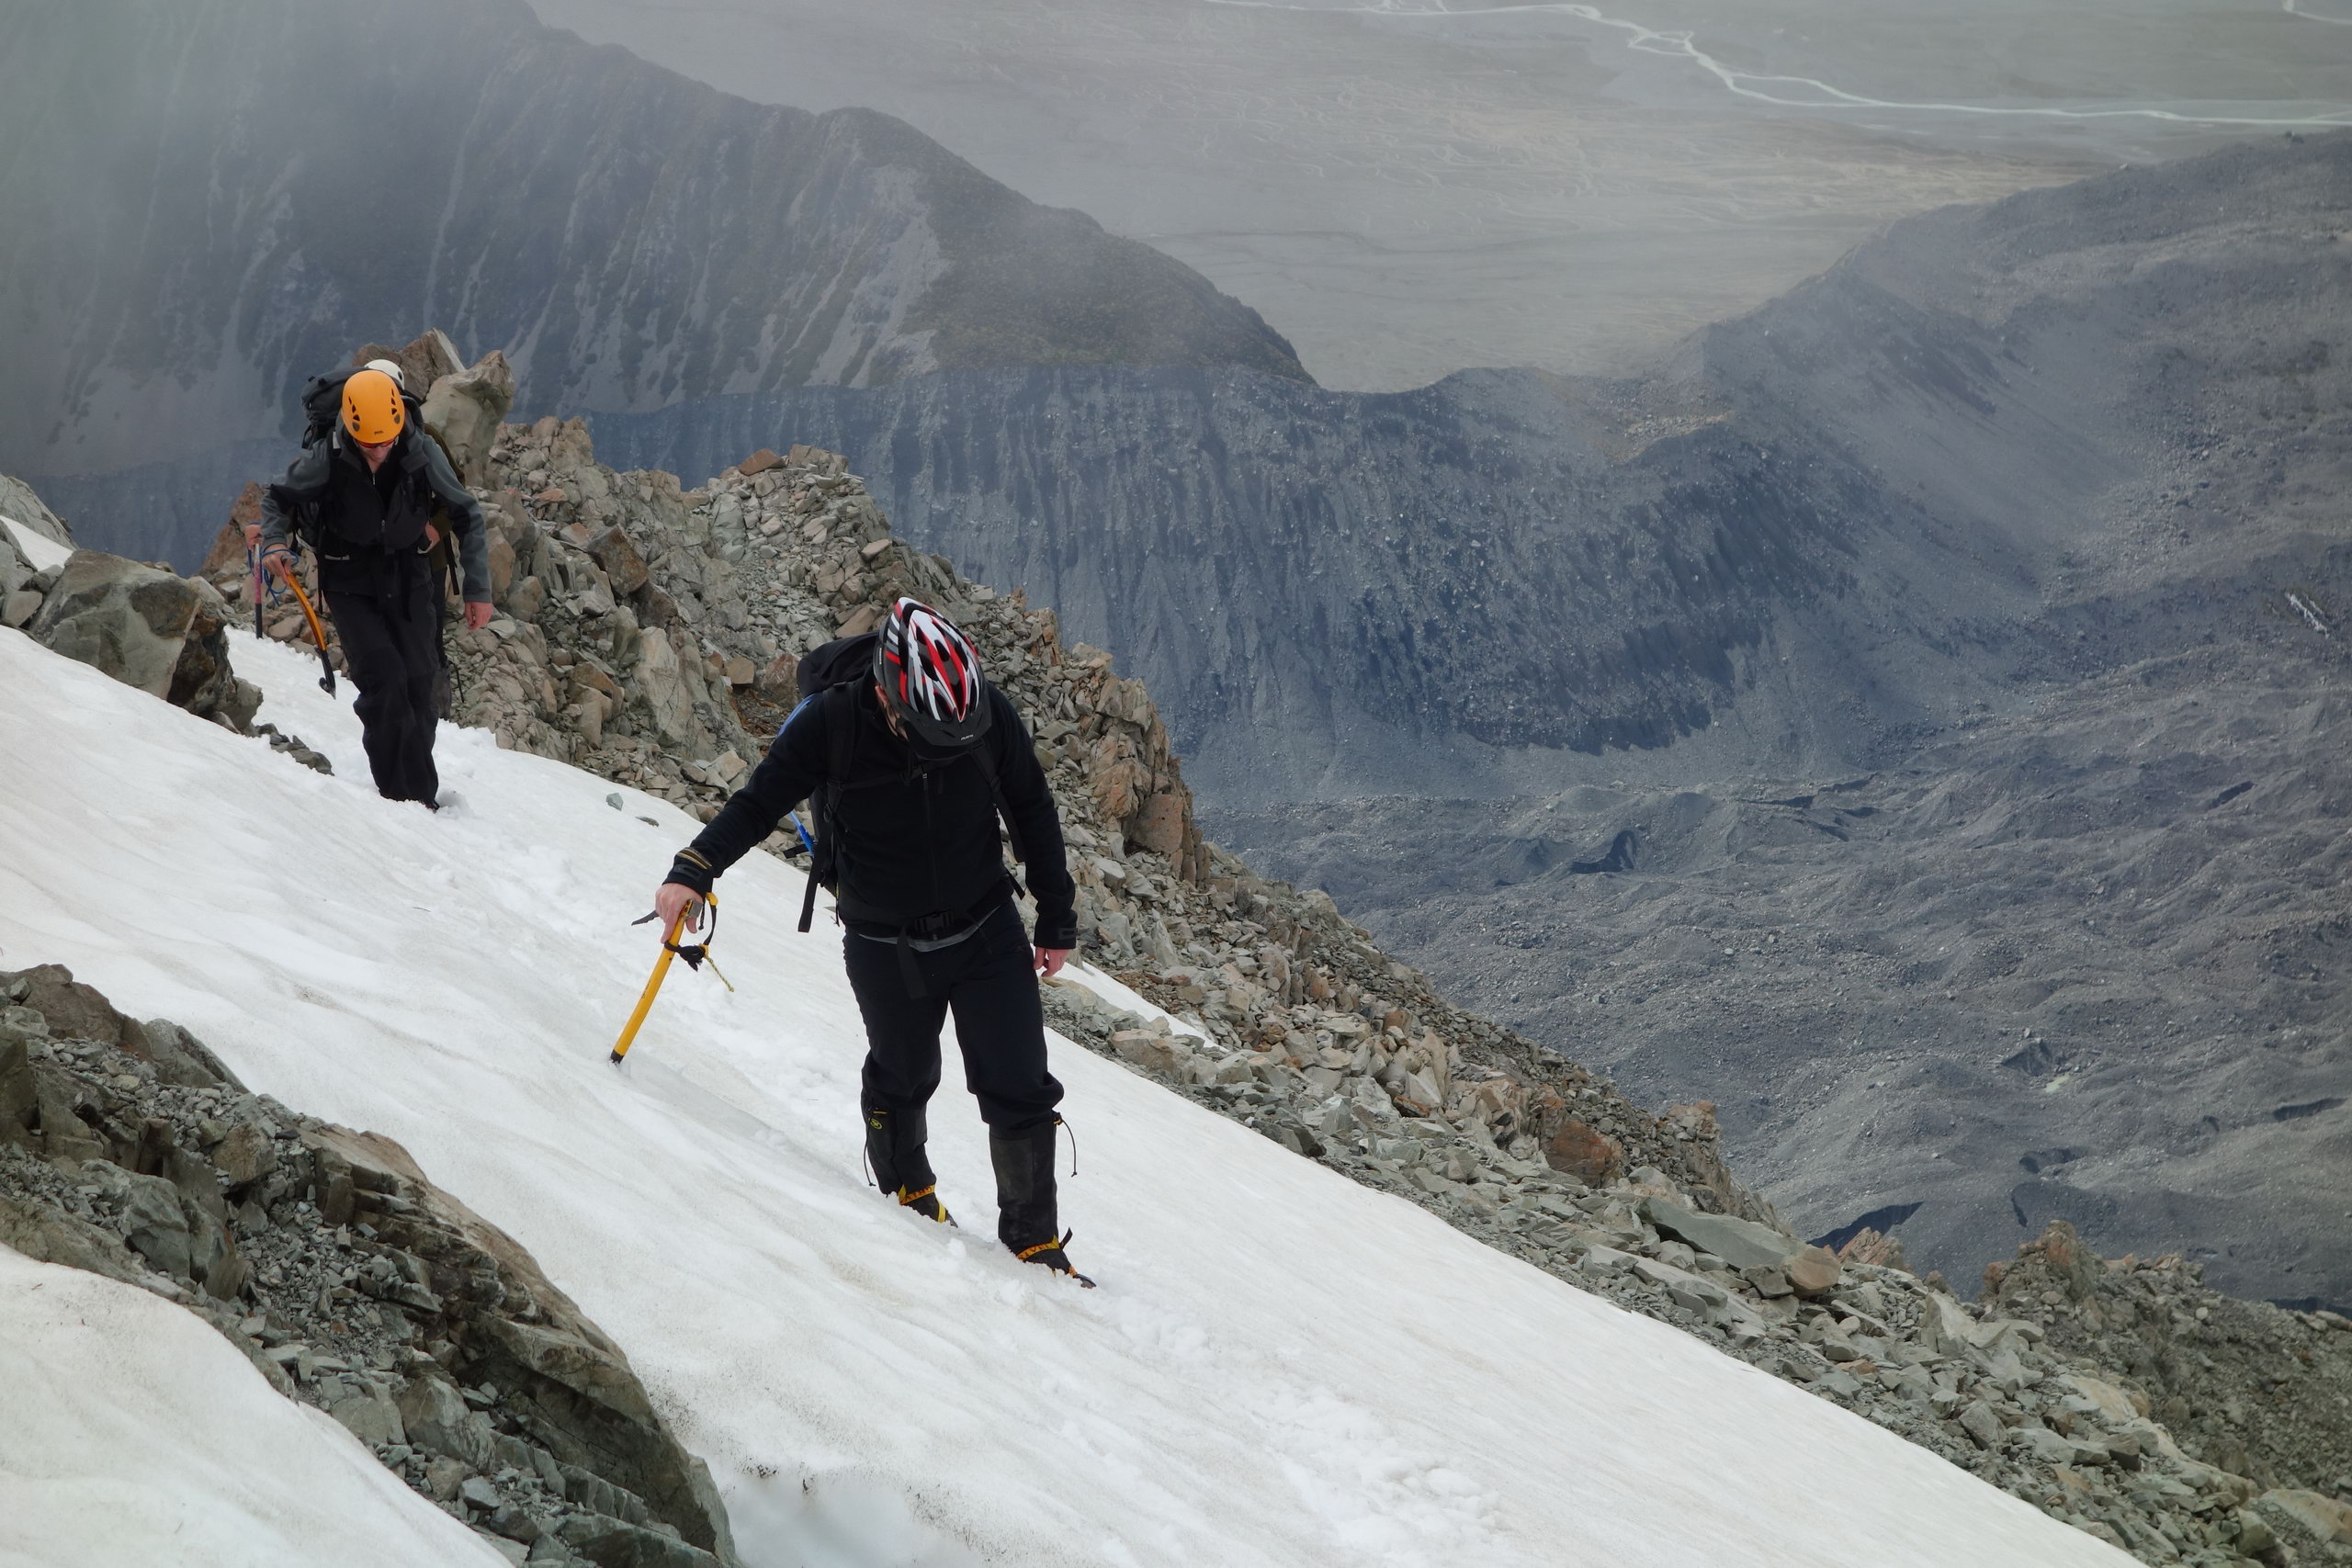 Kenneth and Mikey crossing snow (Ball Pass Dec 2013)